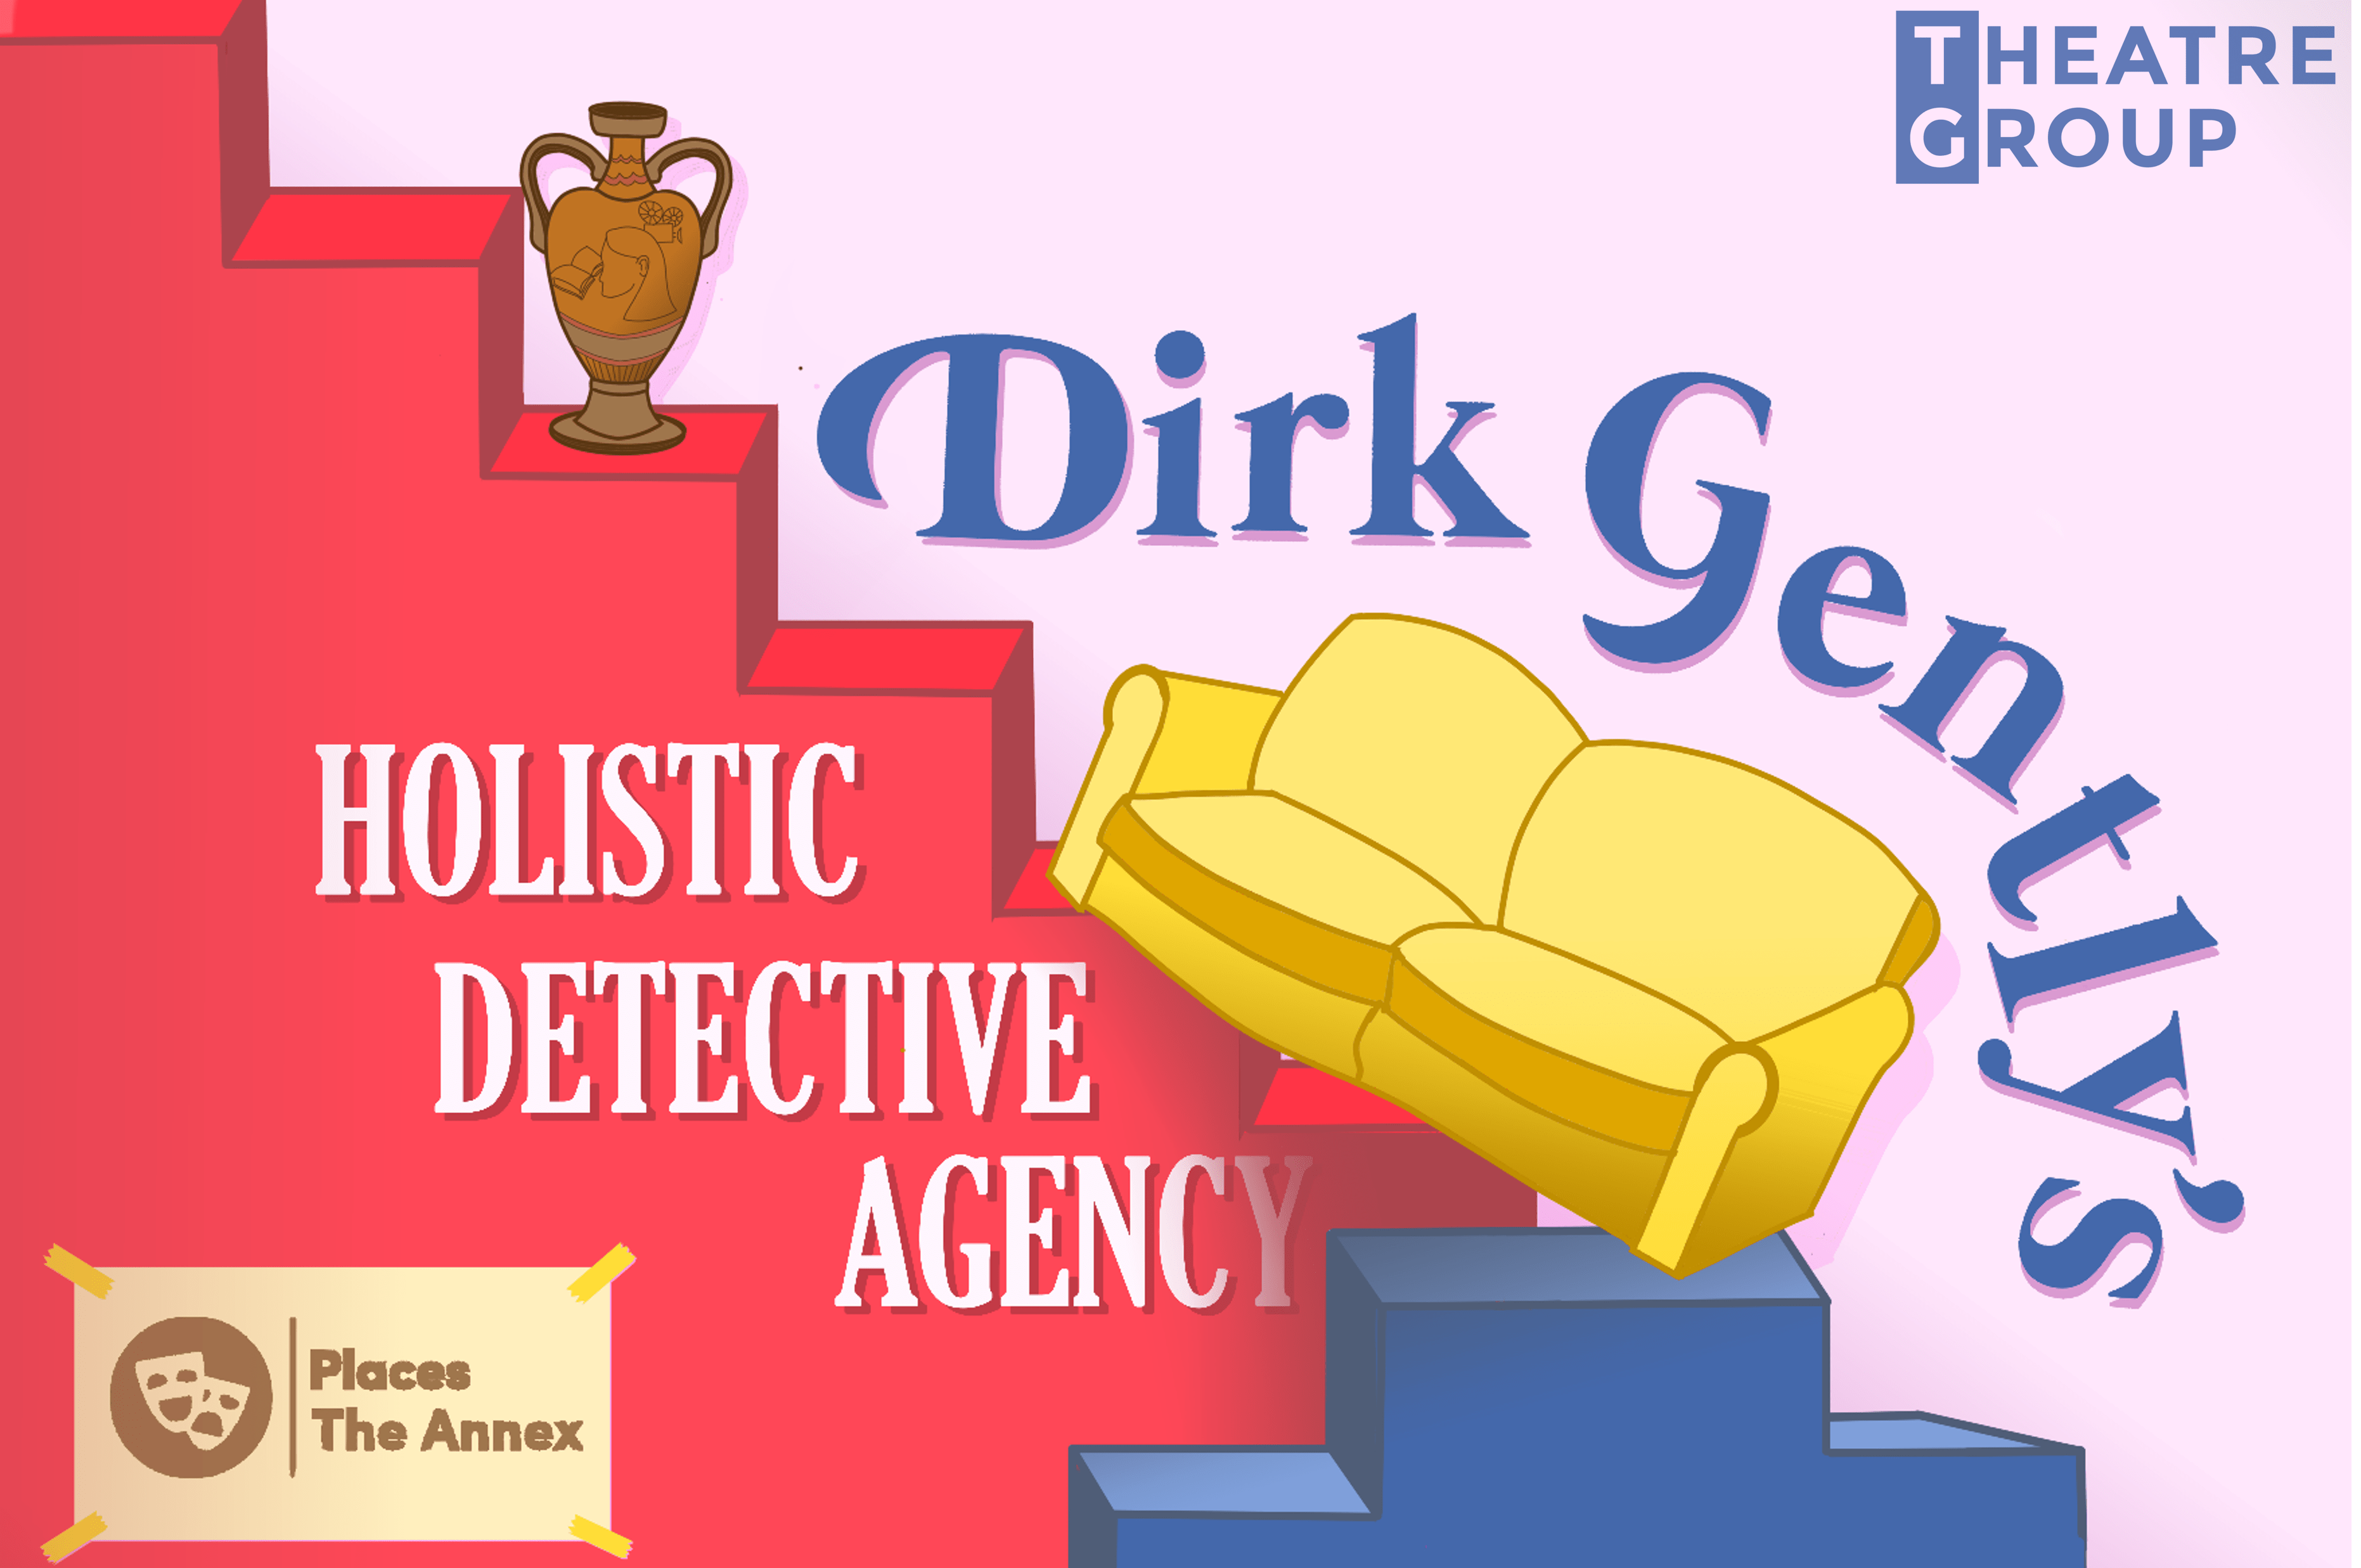 SUSU Theatre Group Presents: Dirk Gently's Holistic Detective Agency